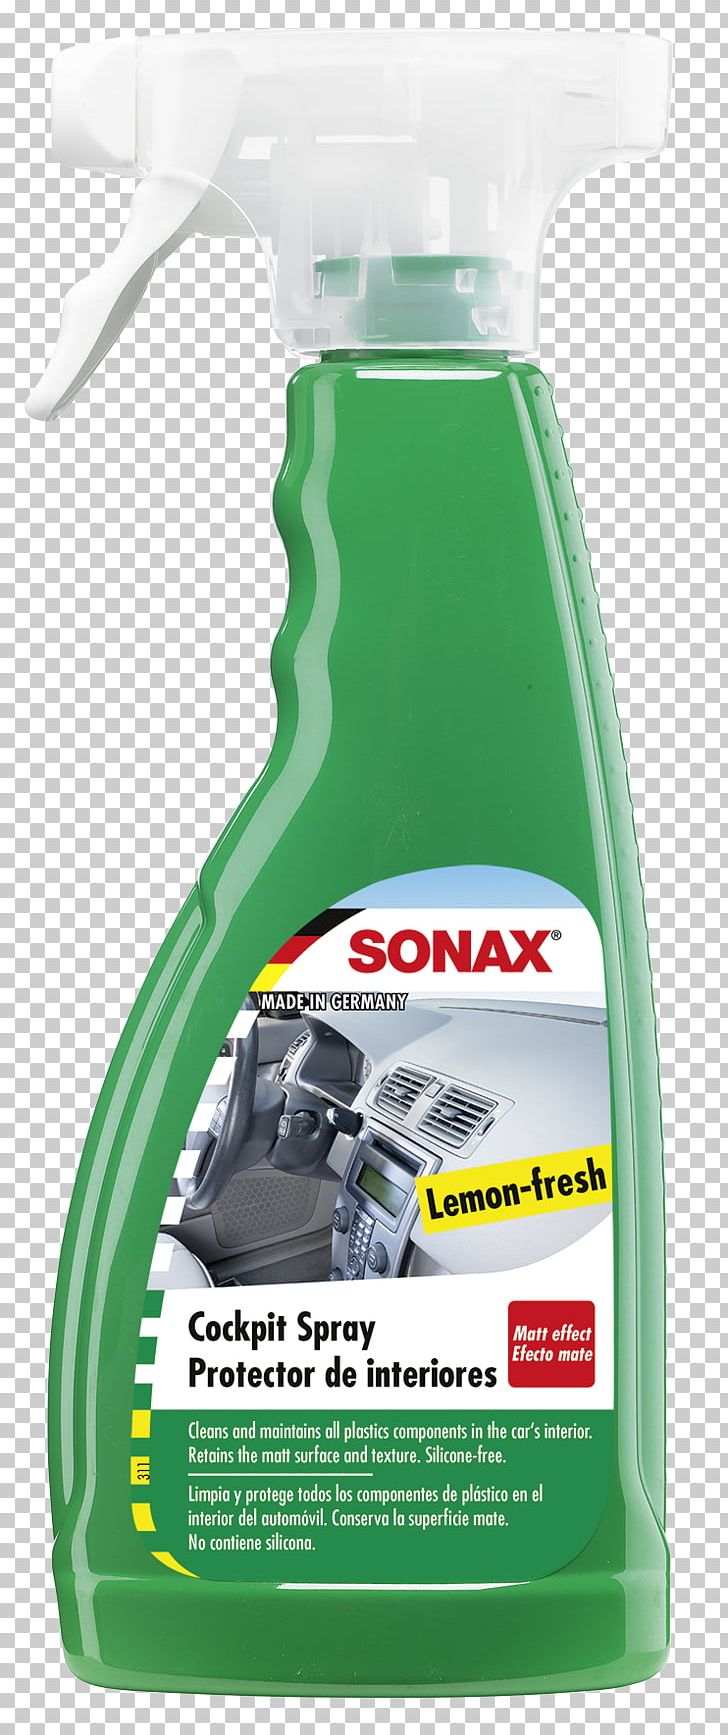 Sonax Car Cleaning Aerosol Spray PNG, Clipart, Aerosol, Aerosol Spray, Car, Car Wash, Cleaning Free PNG Download